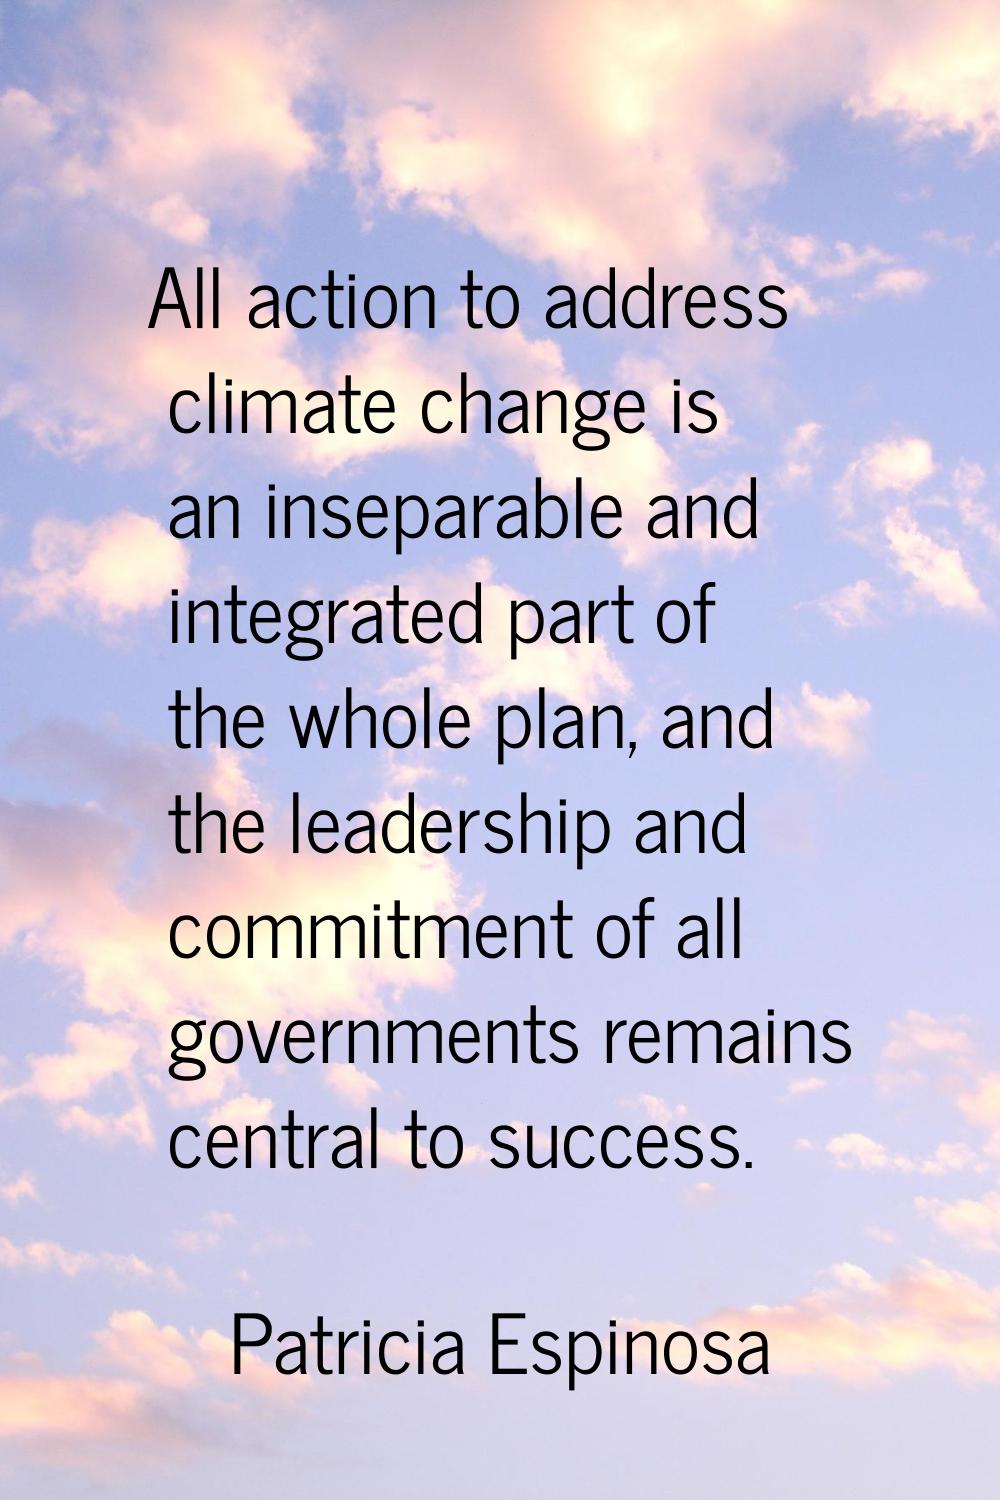 All action to address climate change is an inseparable and integrated part of the whole plan, and t